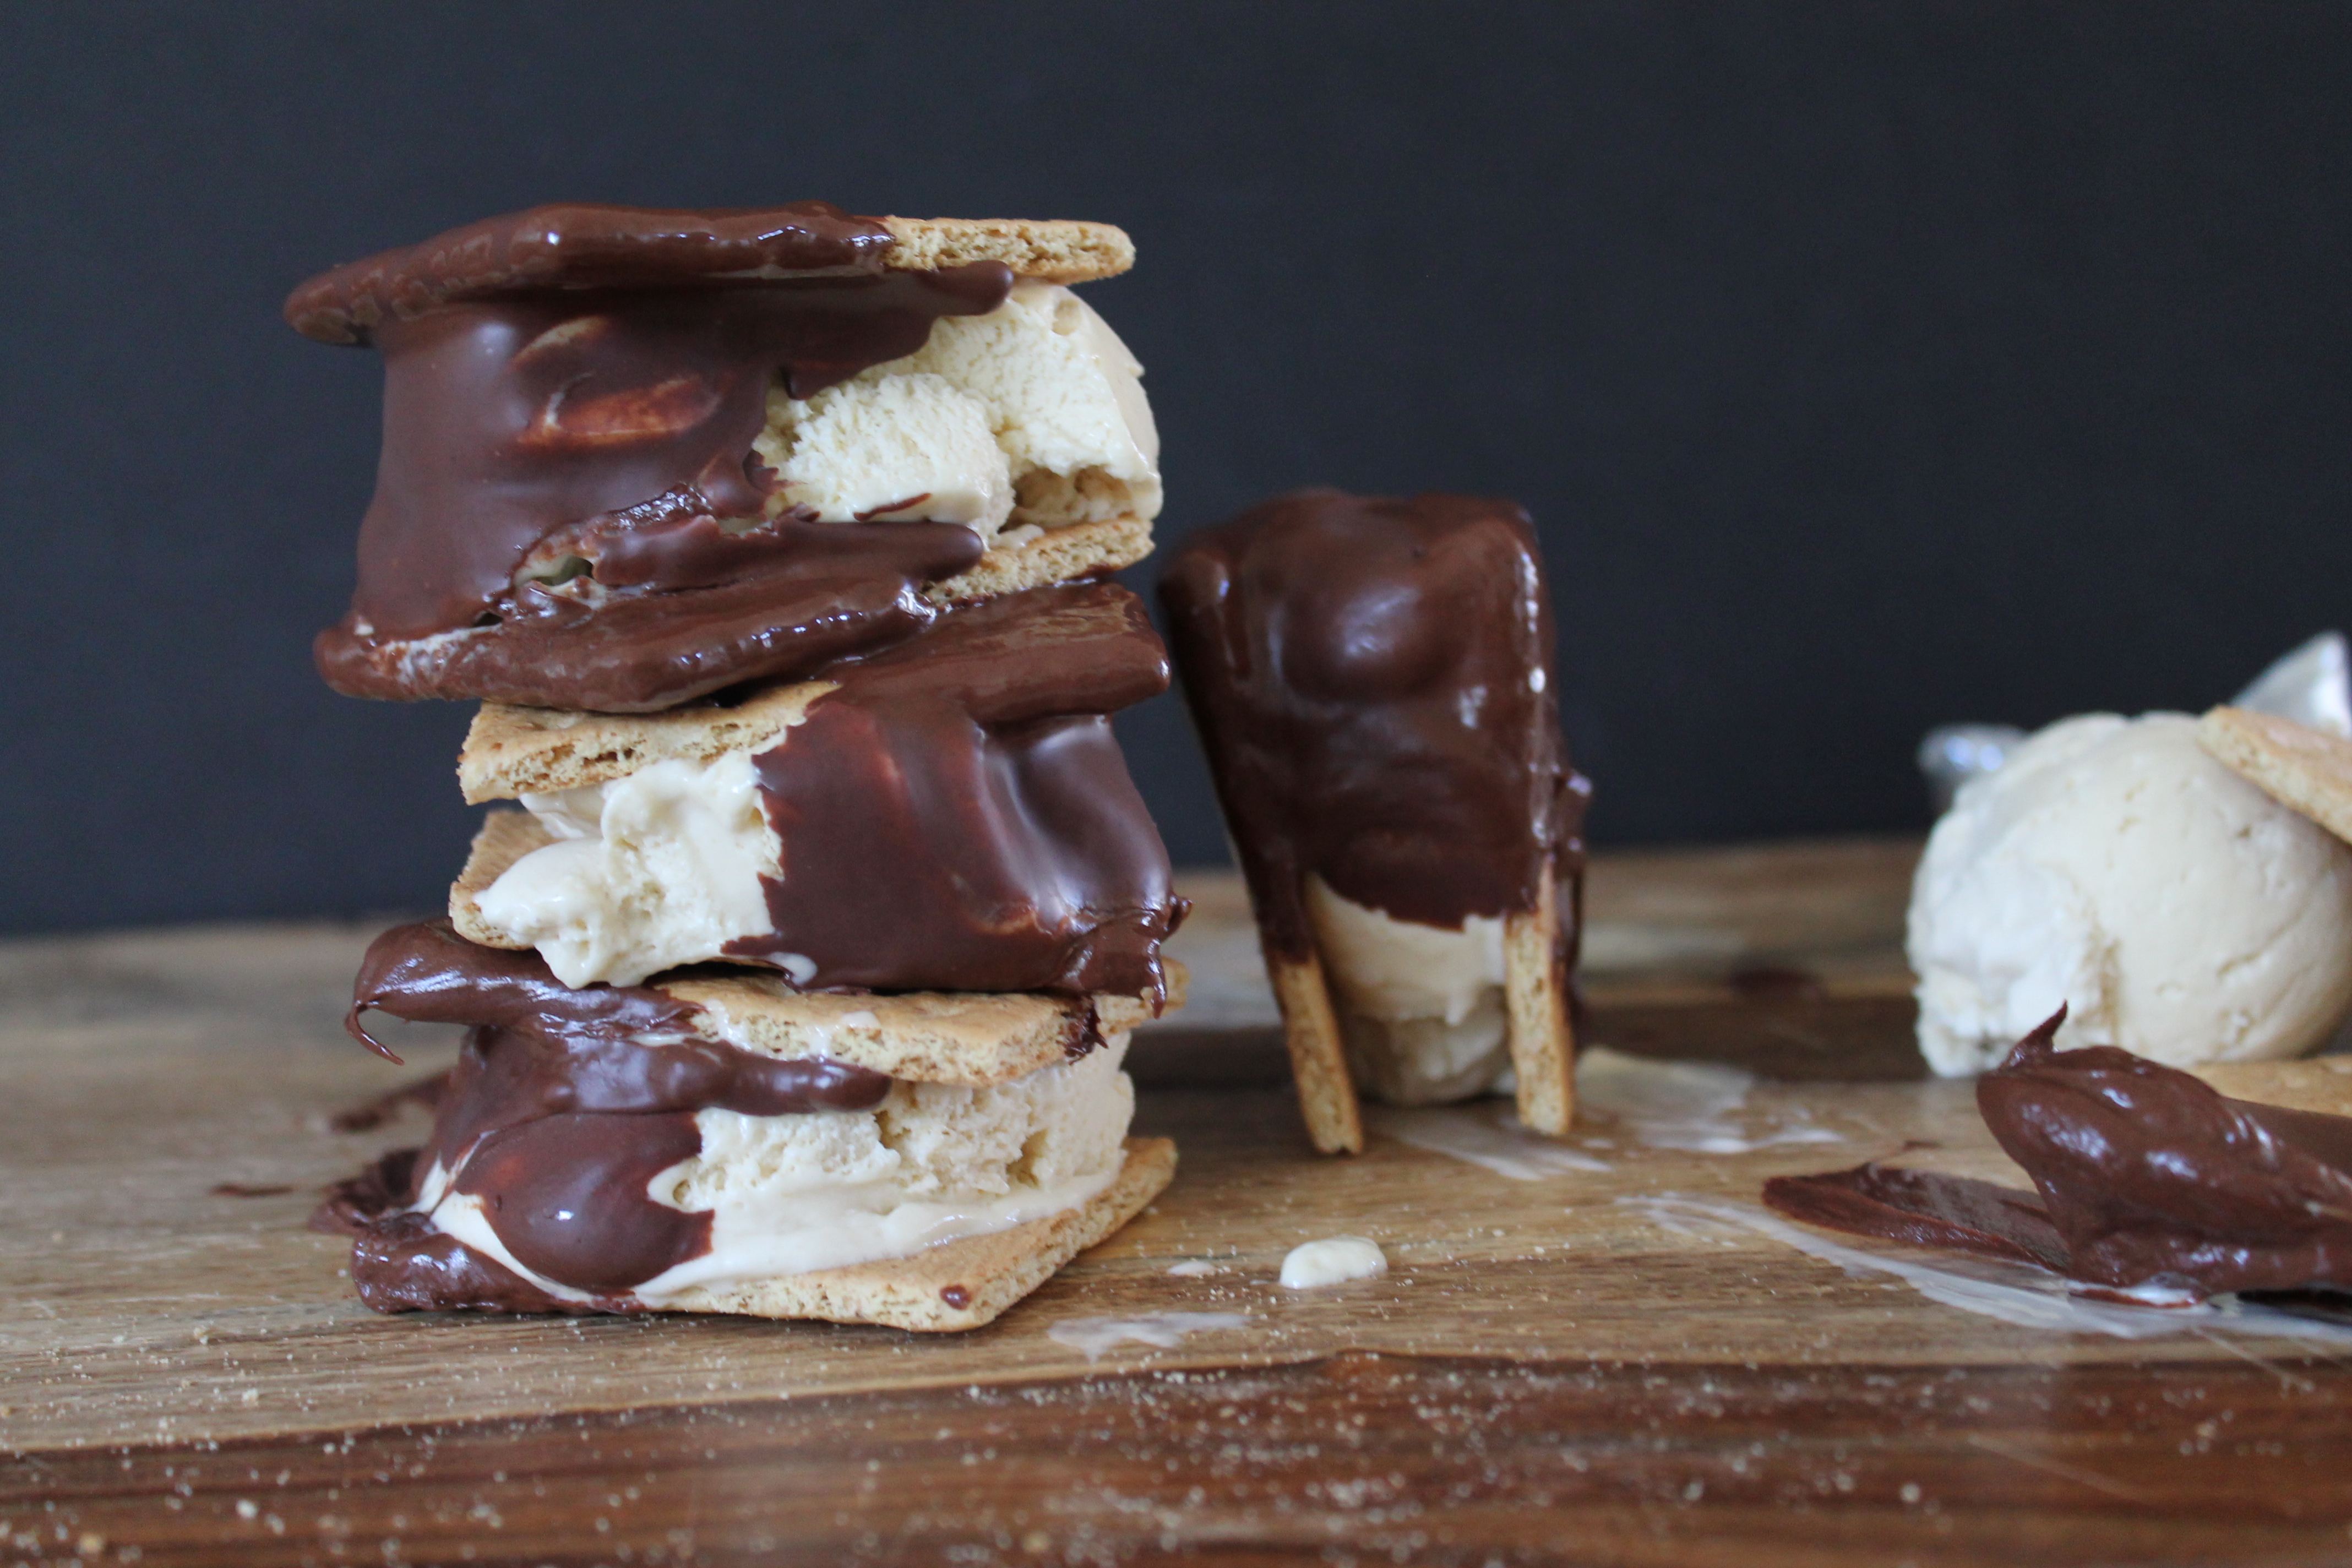 Dipped Ice Cream S'Mores